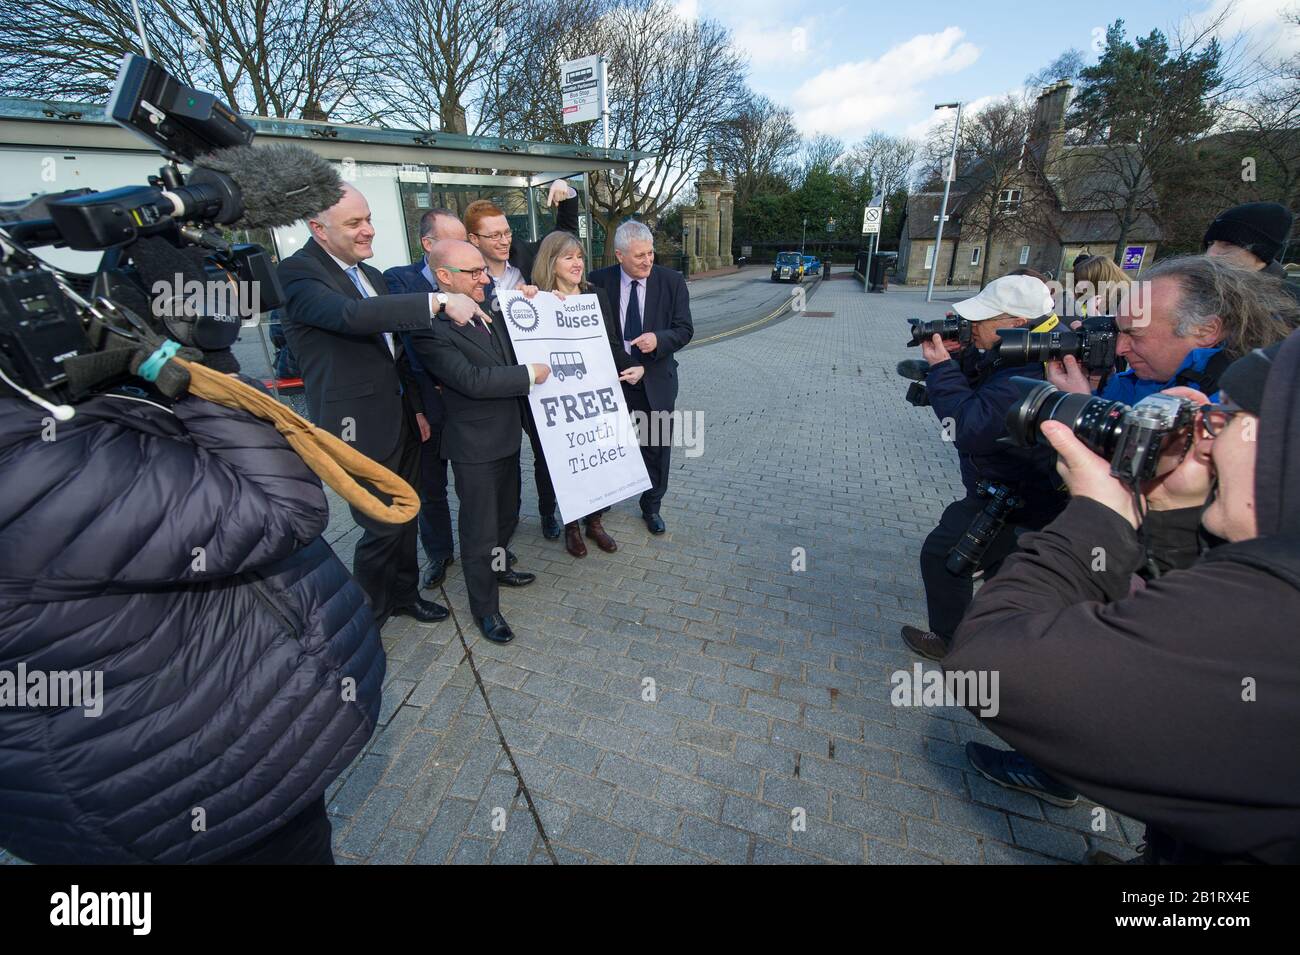 Edinburgh, UK. 27 February 2020. Pictured: (L-R being photographed) Mark Ruskell MSP; Patrick Harvie MSP; Andy Wightman MSP; Ross Greer map; Alison Johnstone MSP; John Finnie MSP. Ahead of the budget debate this afternoon Scottish Greens Parliamentary Co-Leaders Alison Johnstone MSP and Patrick Harvie MSP along with the Green MSP group will stage a photocall outside the Scottish Parliament to celebrate their free bus travel for under 19s budget win. The Scottish Greens yesterday announced that a deal had been struck on free bus travel, more money for councils, extra resource for community Stock Photo